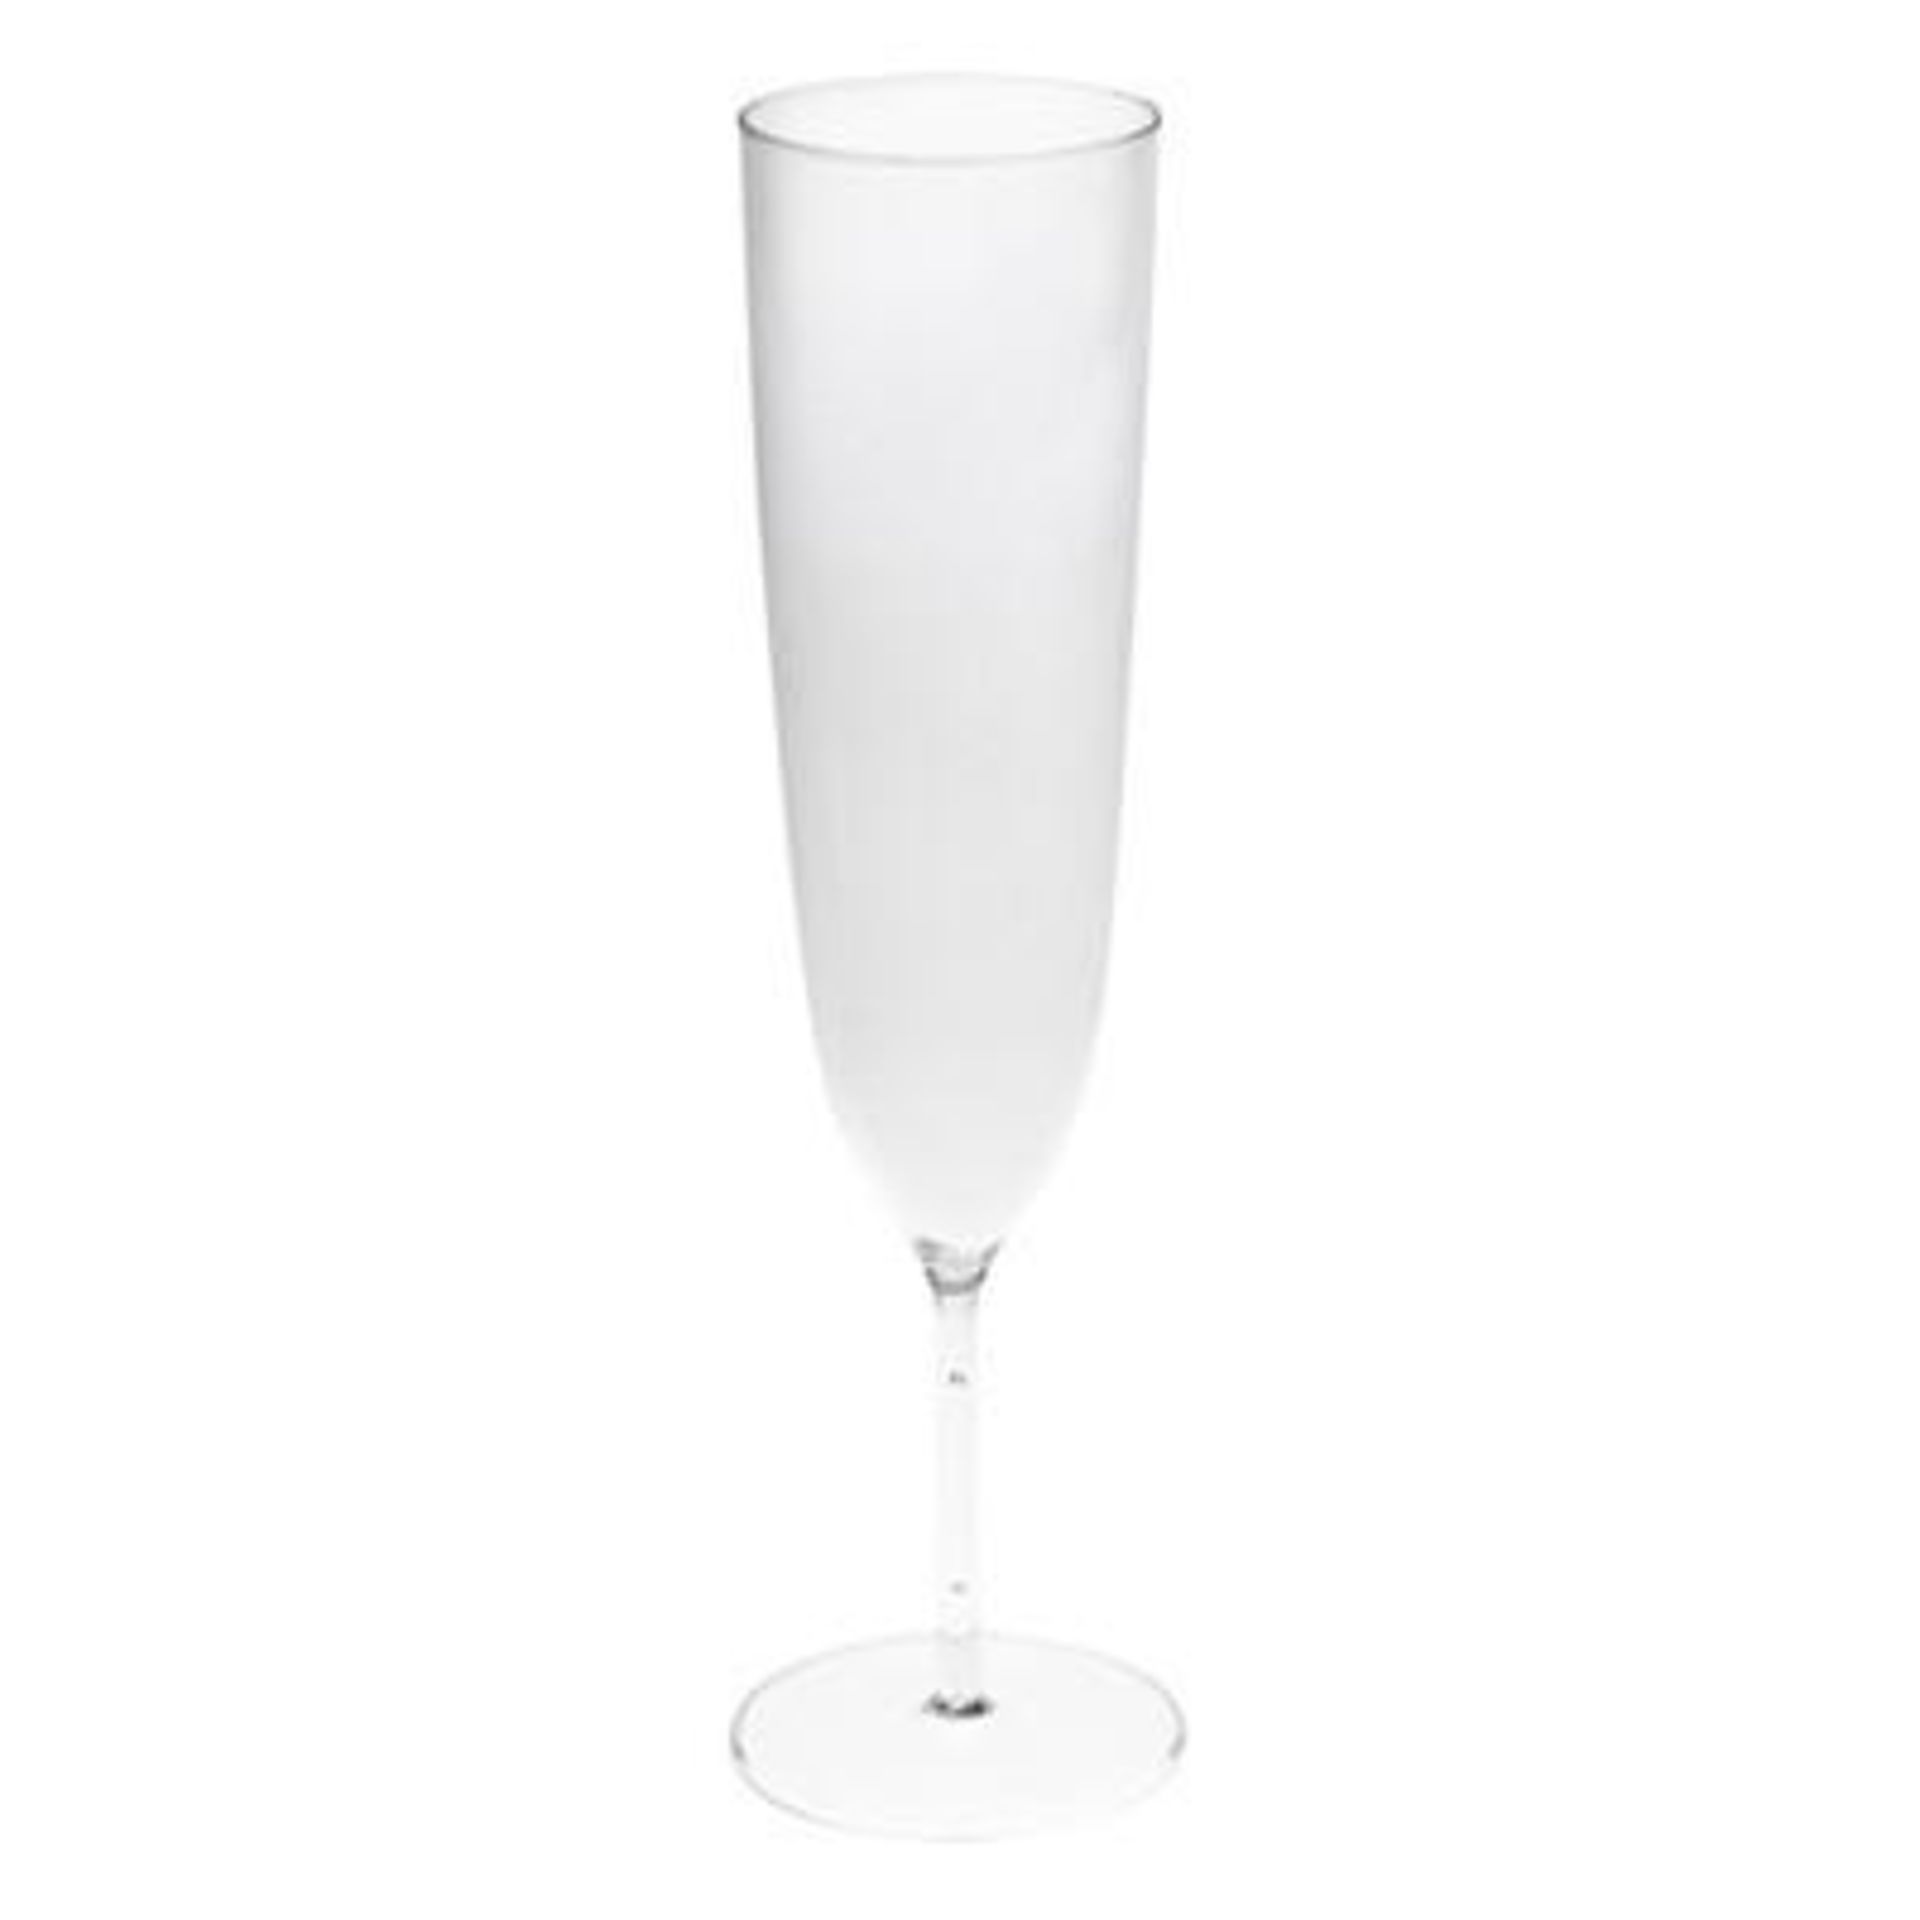 400 x Disposable Clear Plastic Champagne Flutes (170ml) - Brand: Remmerco CG111P - Brand New - Image 4 of 4